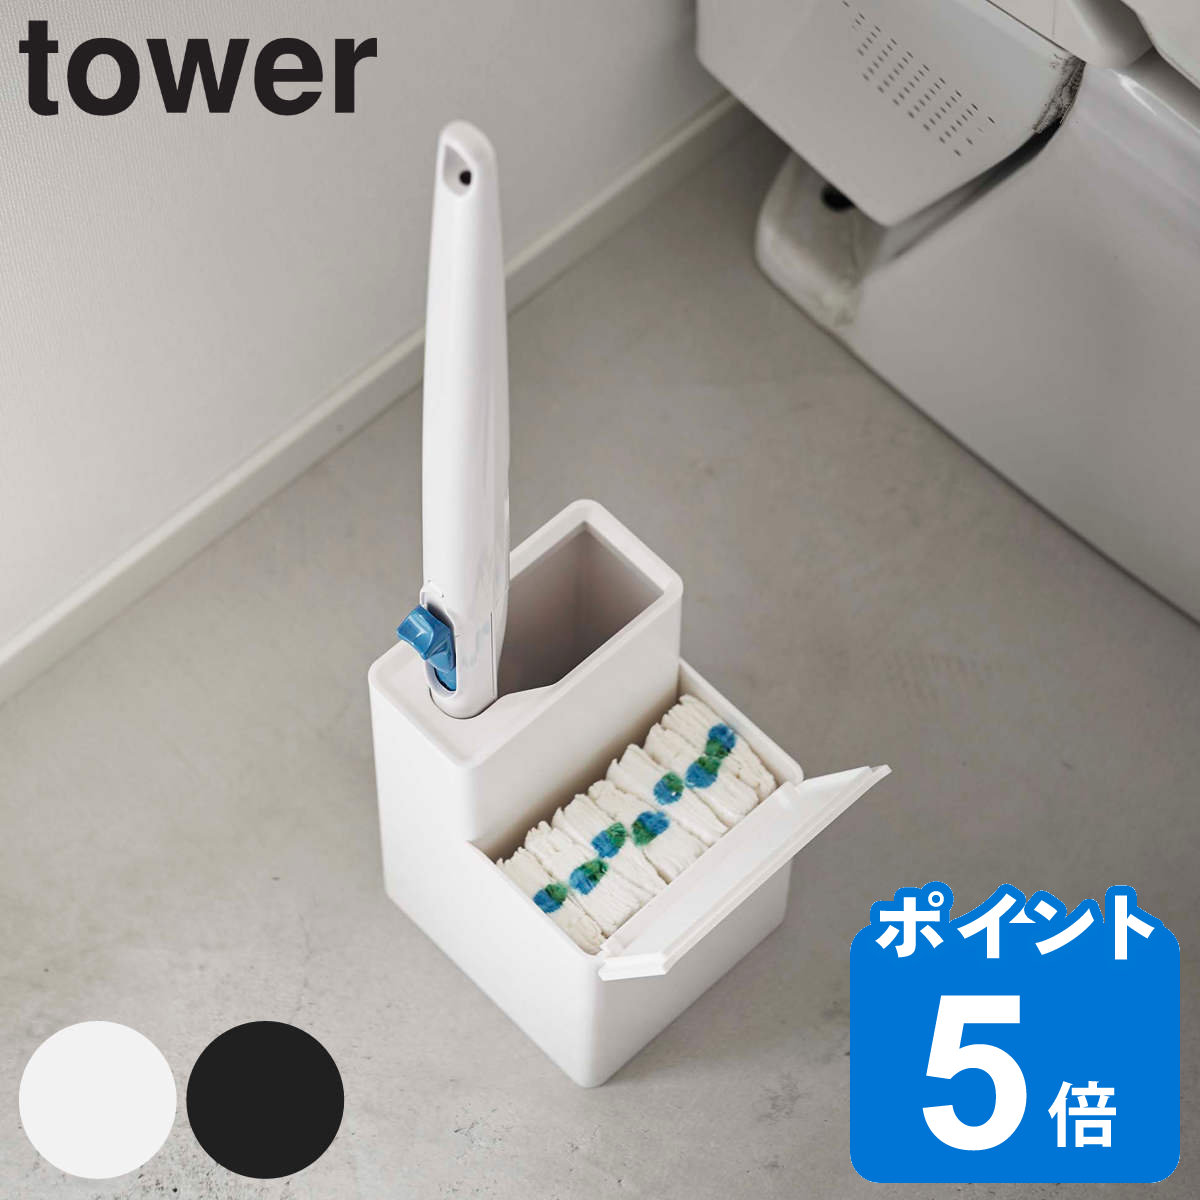 tower... toilet brush stand only ( tower Yamazaki real industry toilet brush storage disposable toilet cleaning cleaning toilet brush stand )